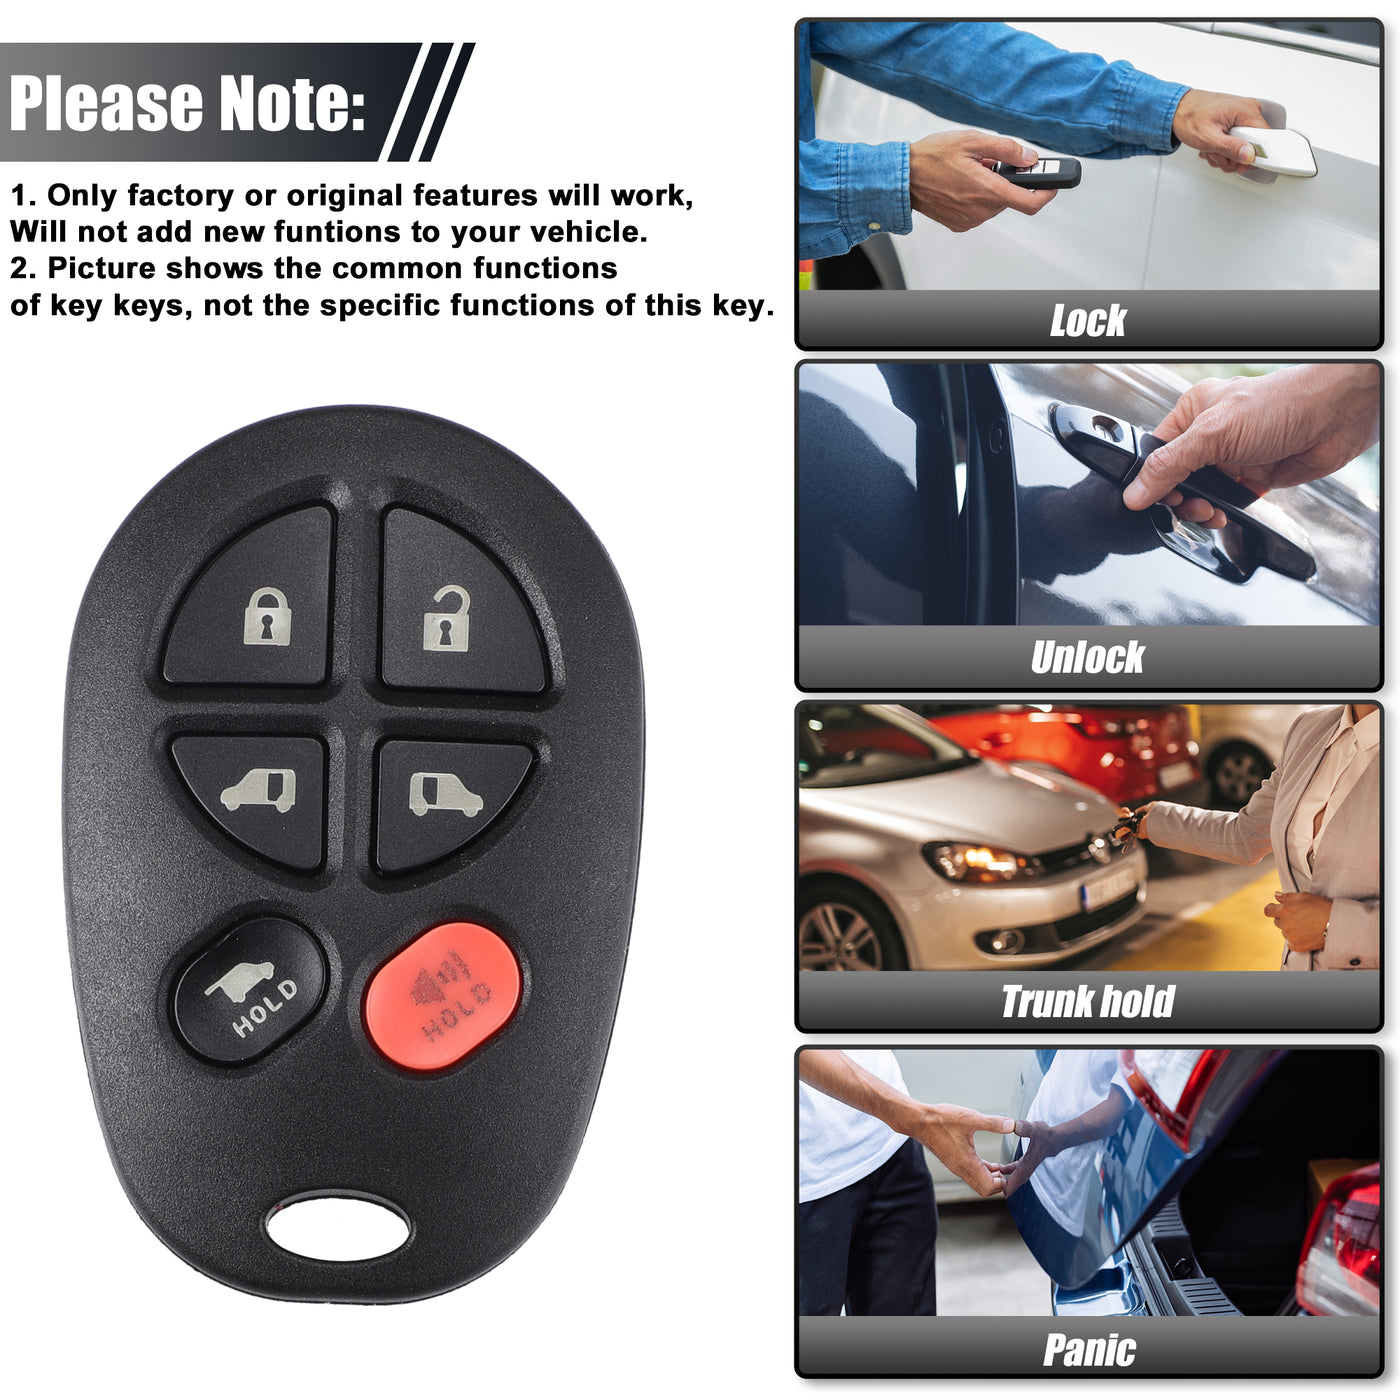 X AUTOHAUX Key Programmer with Keyless Entry Remote Key Fob Replacement for Toyota Sienna XLE/Limited 2004-2018 GQ43VT20T 315Mhz with Chip 6 Button OBD2 Tool